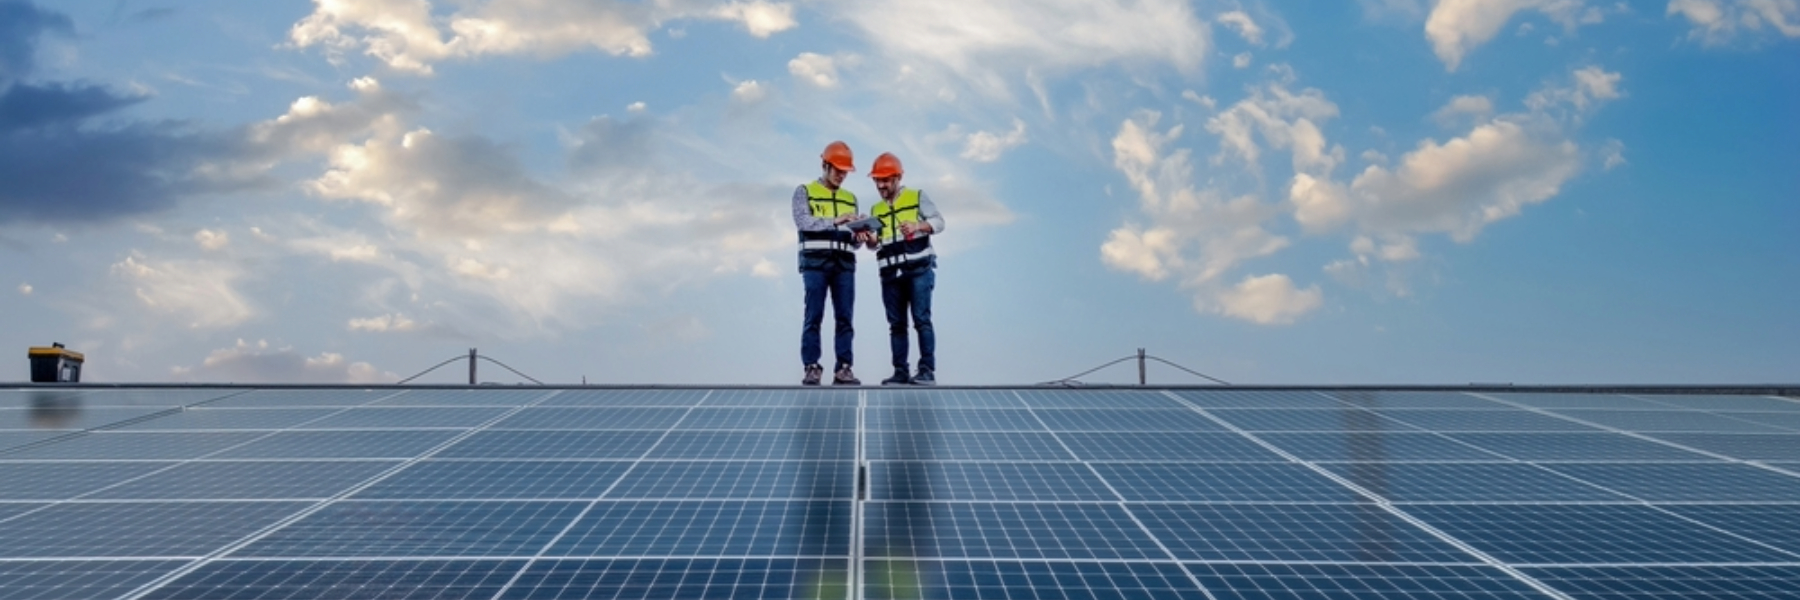 Two engineers working on solar panel roof